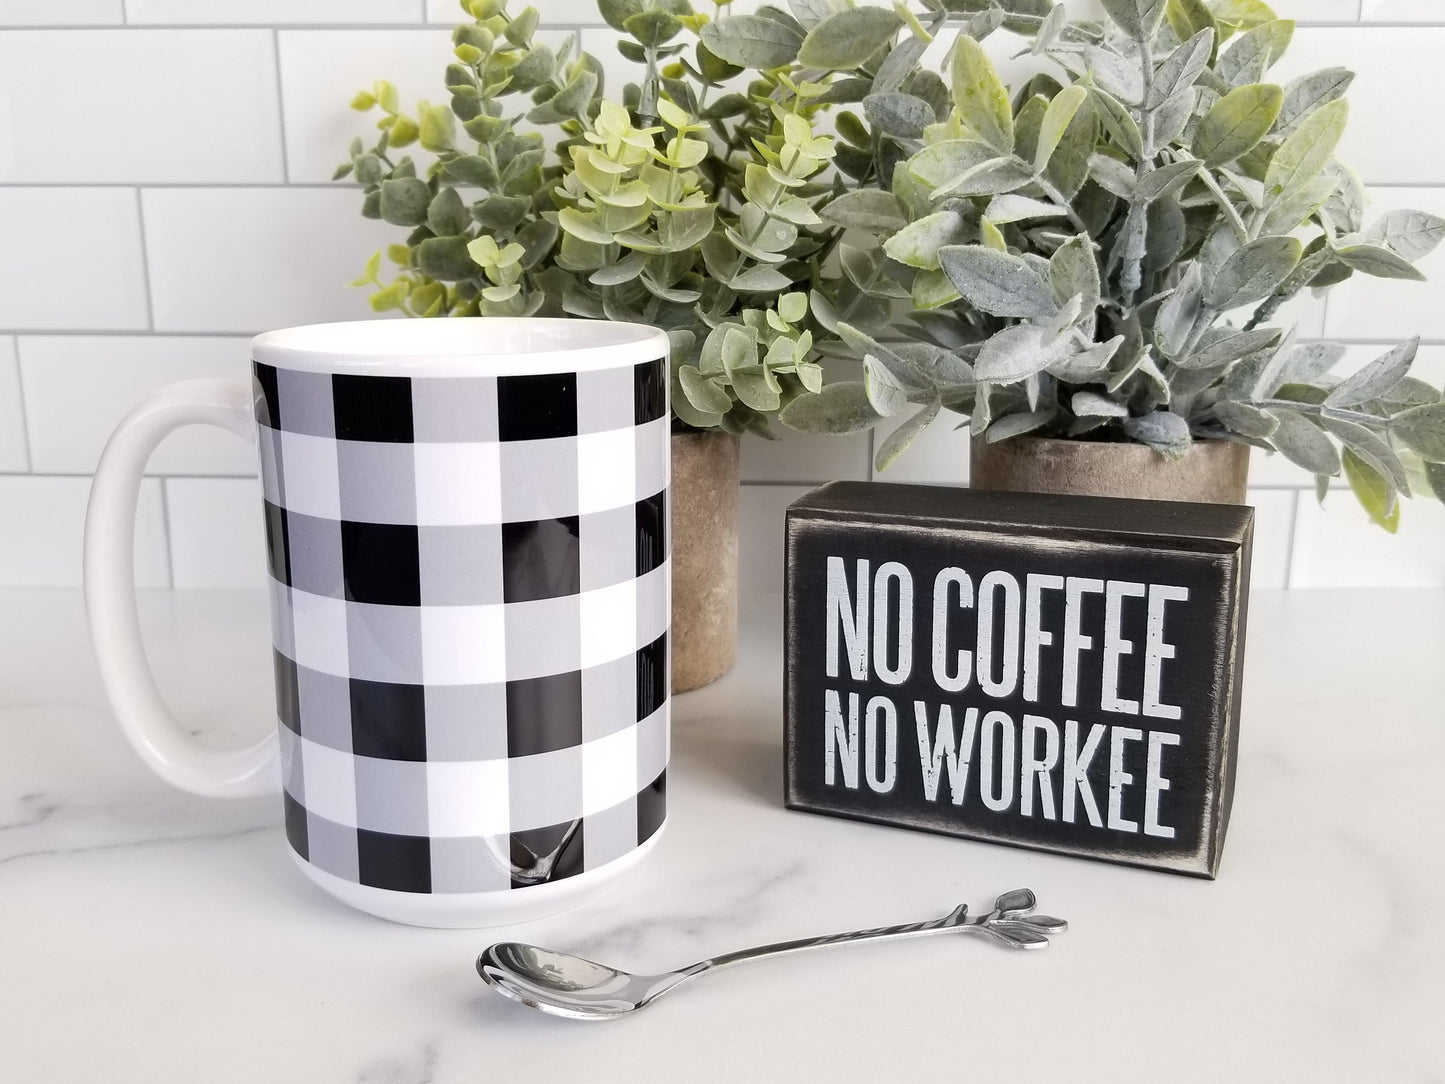 Black and White Buffalo Plaid Mug at Amy's Coffee Mugs. A ceramic coffee mug designed with a black and white buffalo plaid (buffalo check) pattern that wraps around the mug to the handle. Photo shows the mug sitting on a countertop next to a coffee sign, a spoon, and plants. 